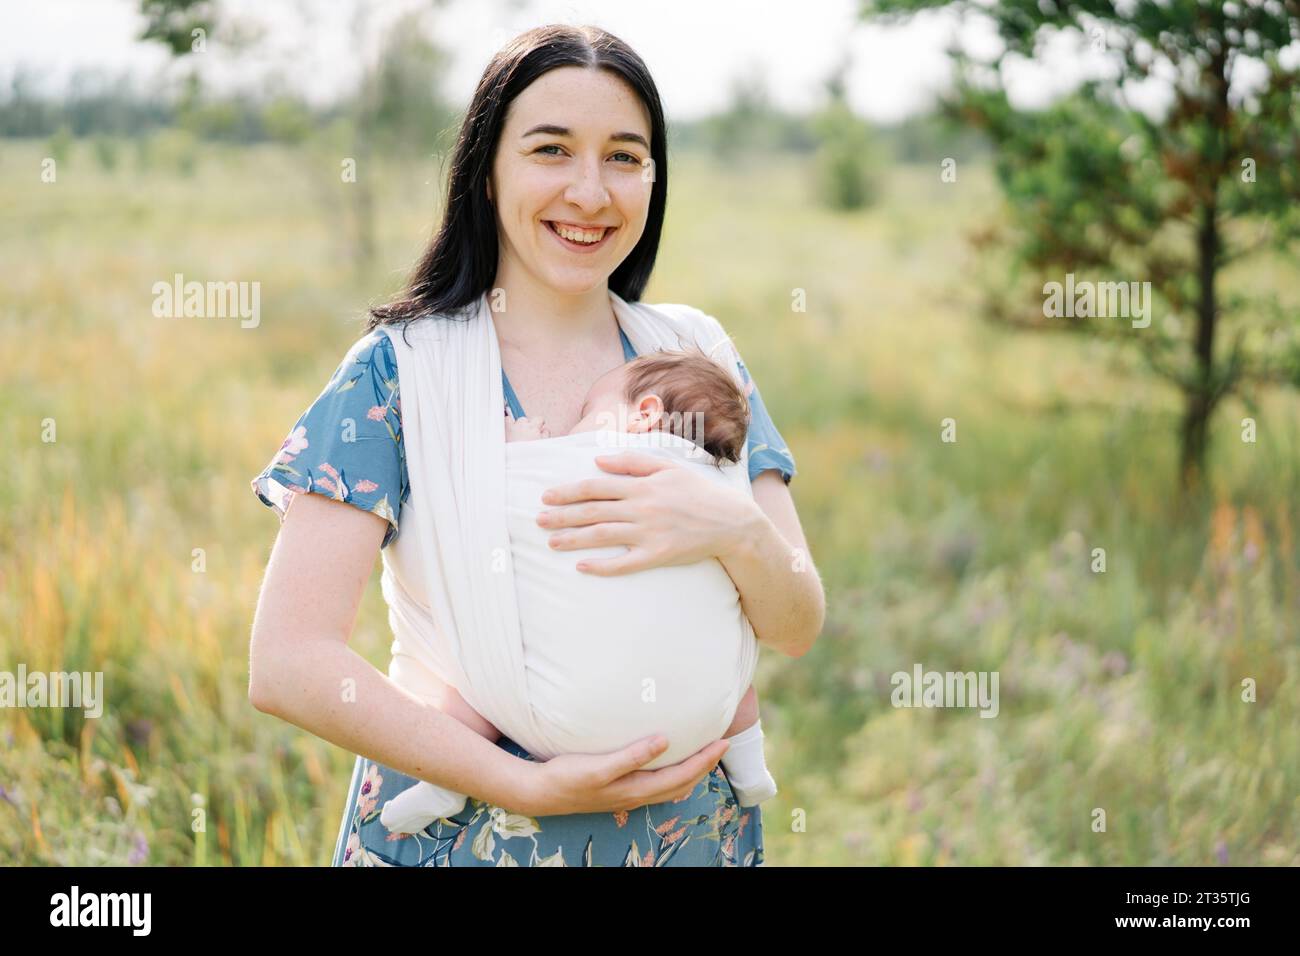 Smiling mother carrying daughter in baby sling Stock Photo